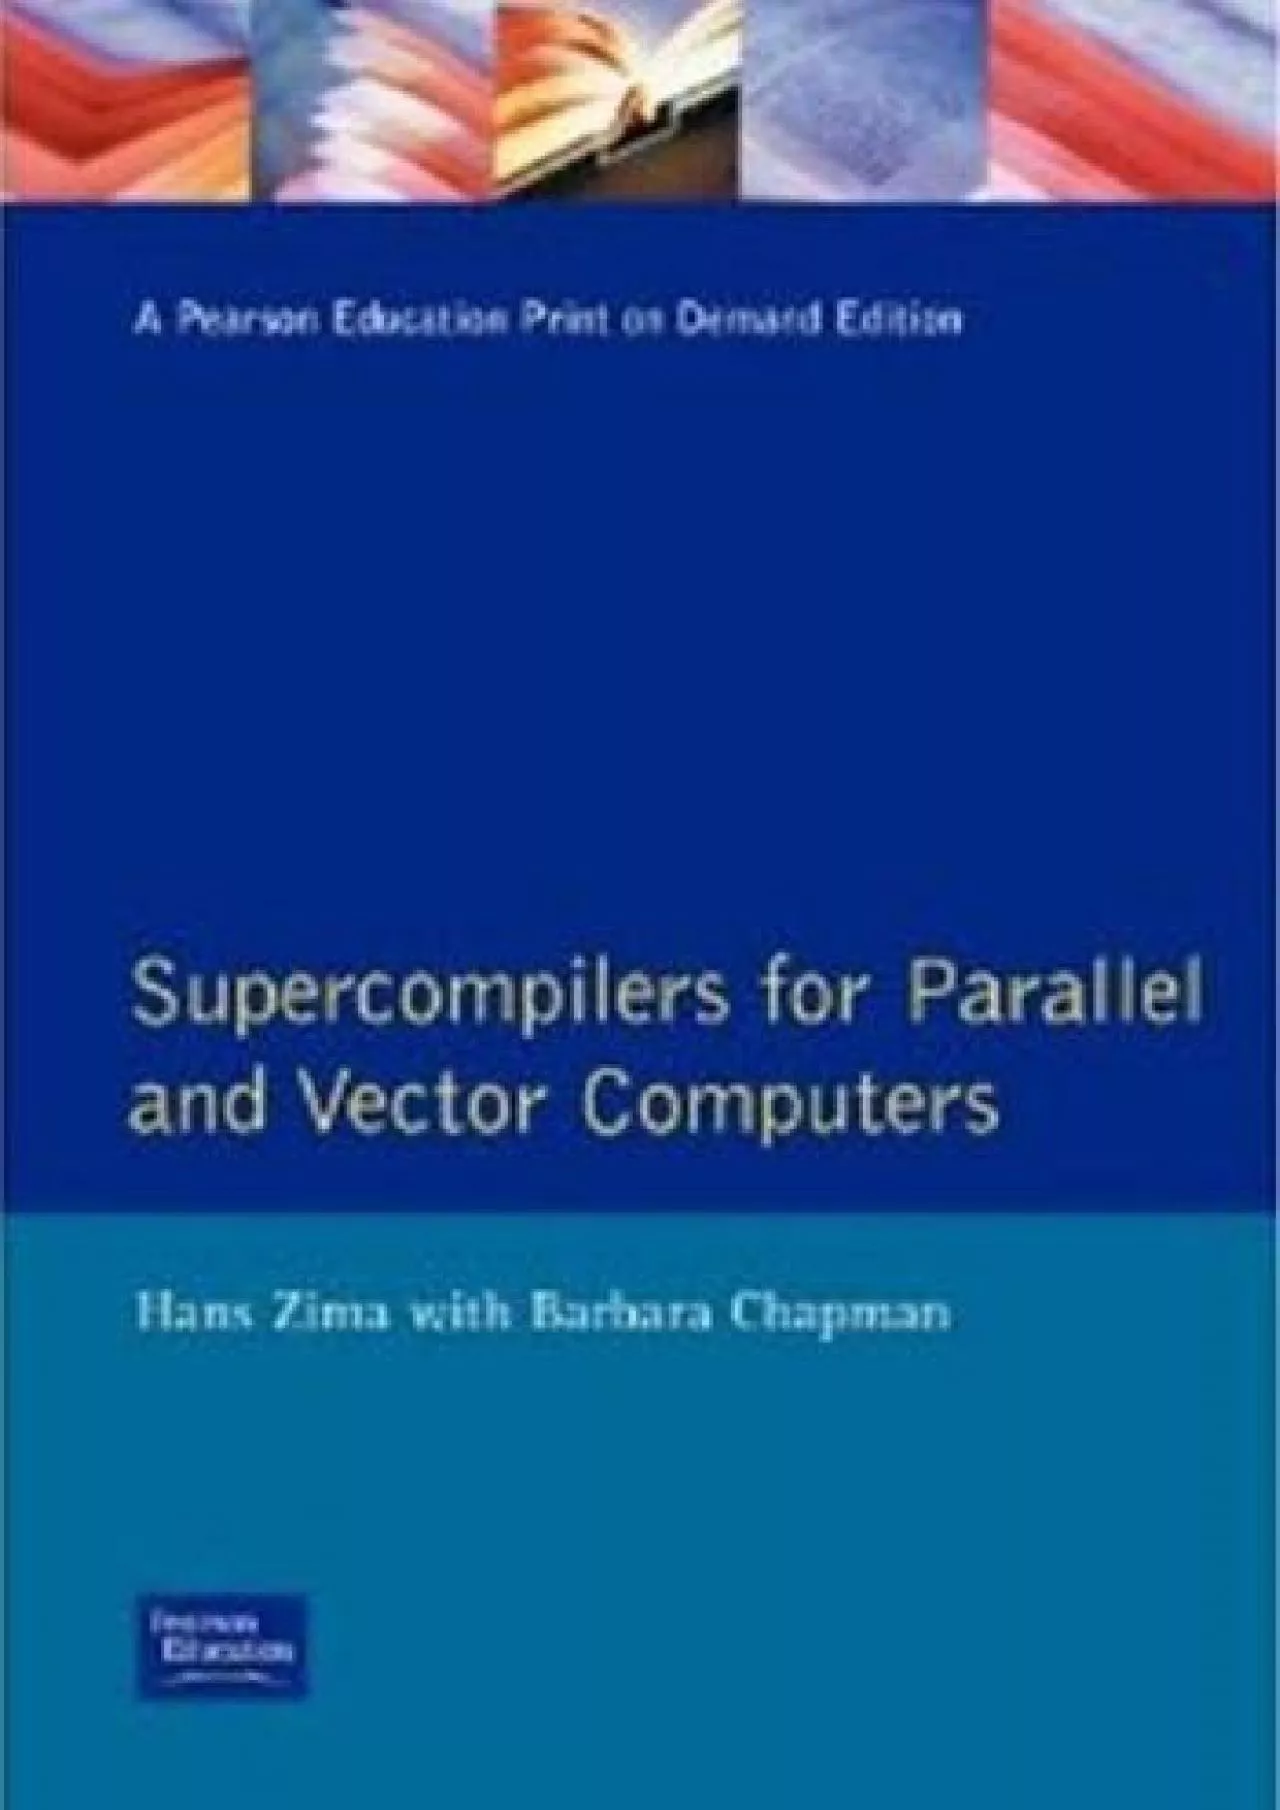 [FREE]-Supercompilers for Parallel and Vector Computers (Acm Press Frontier Series)